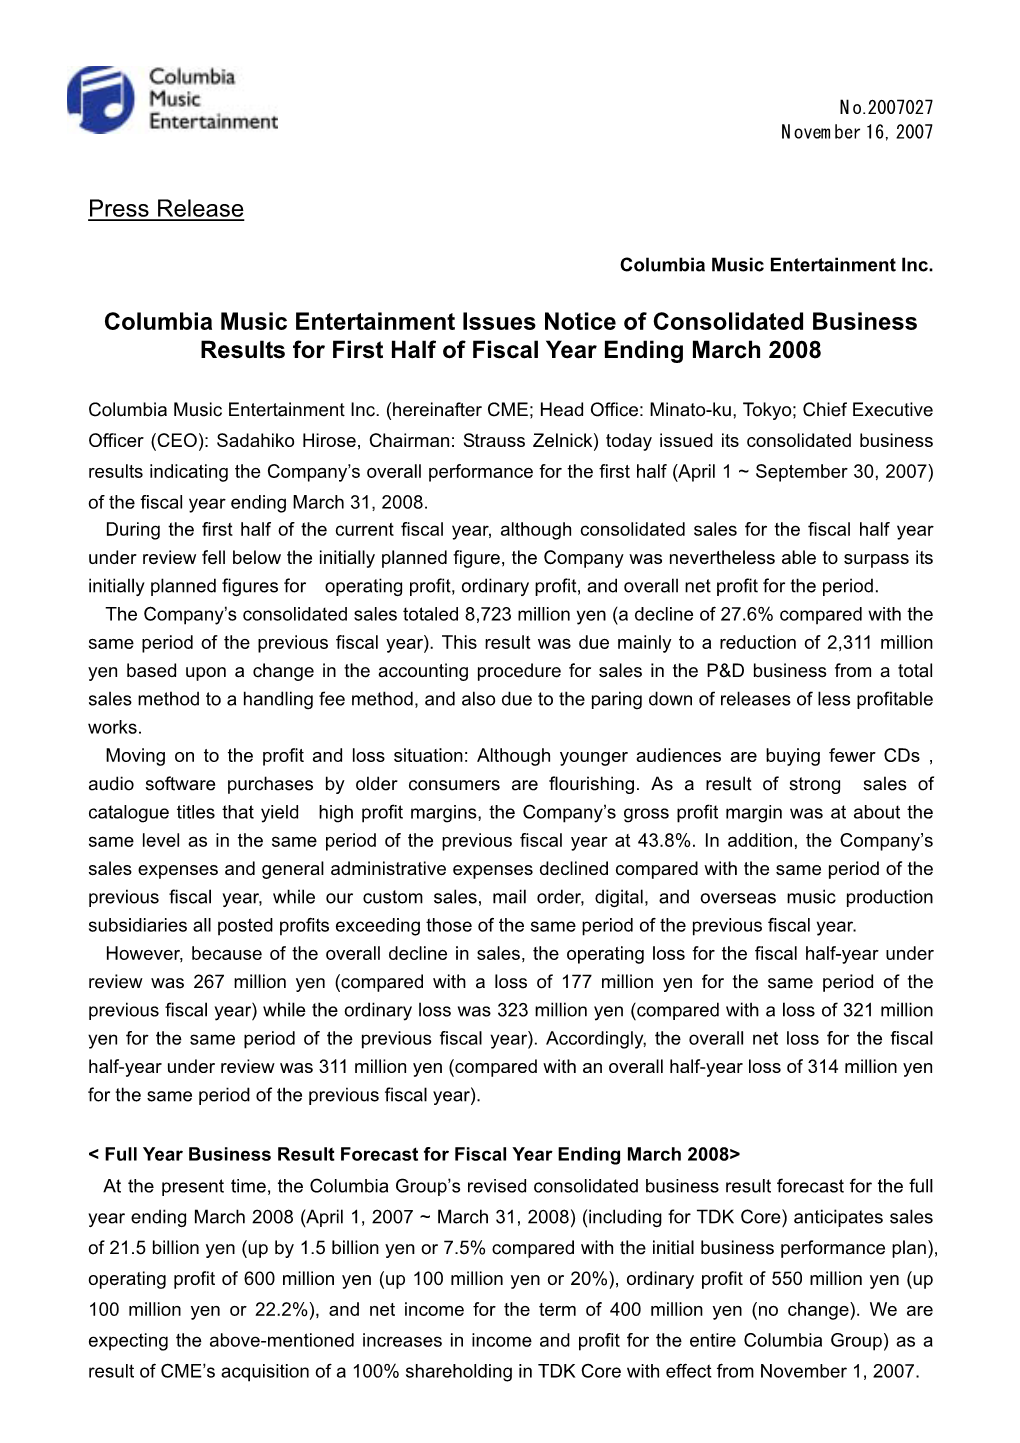 Press Release Columbia Music Entertainment Issues Notice Of